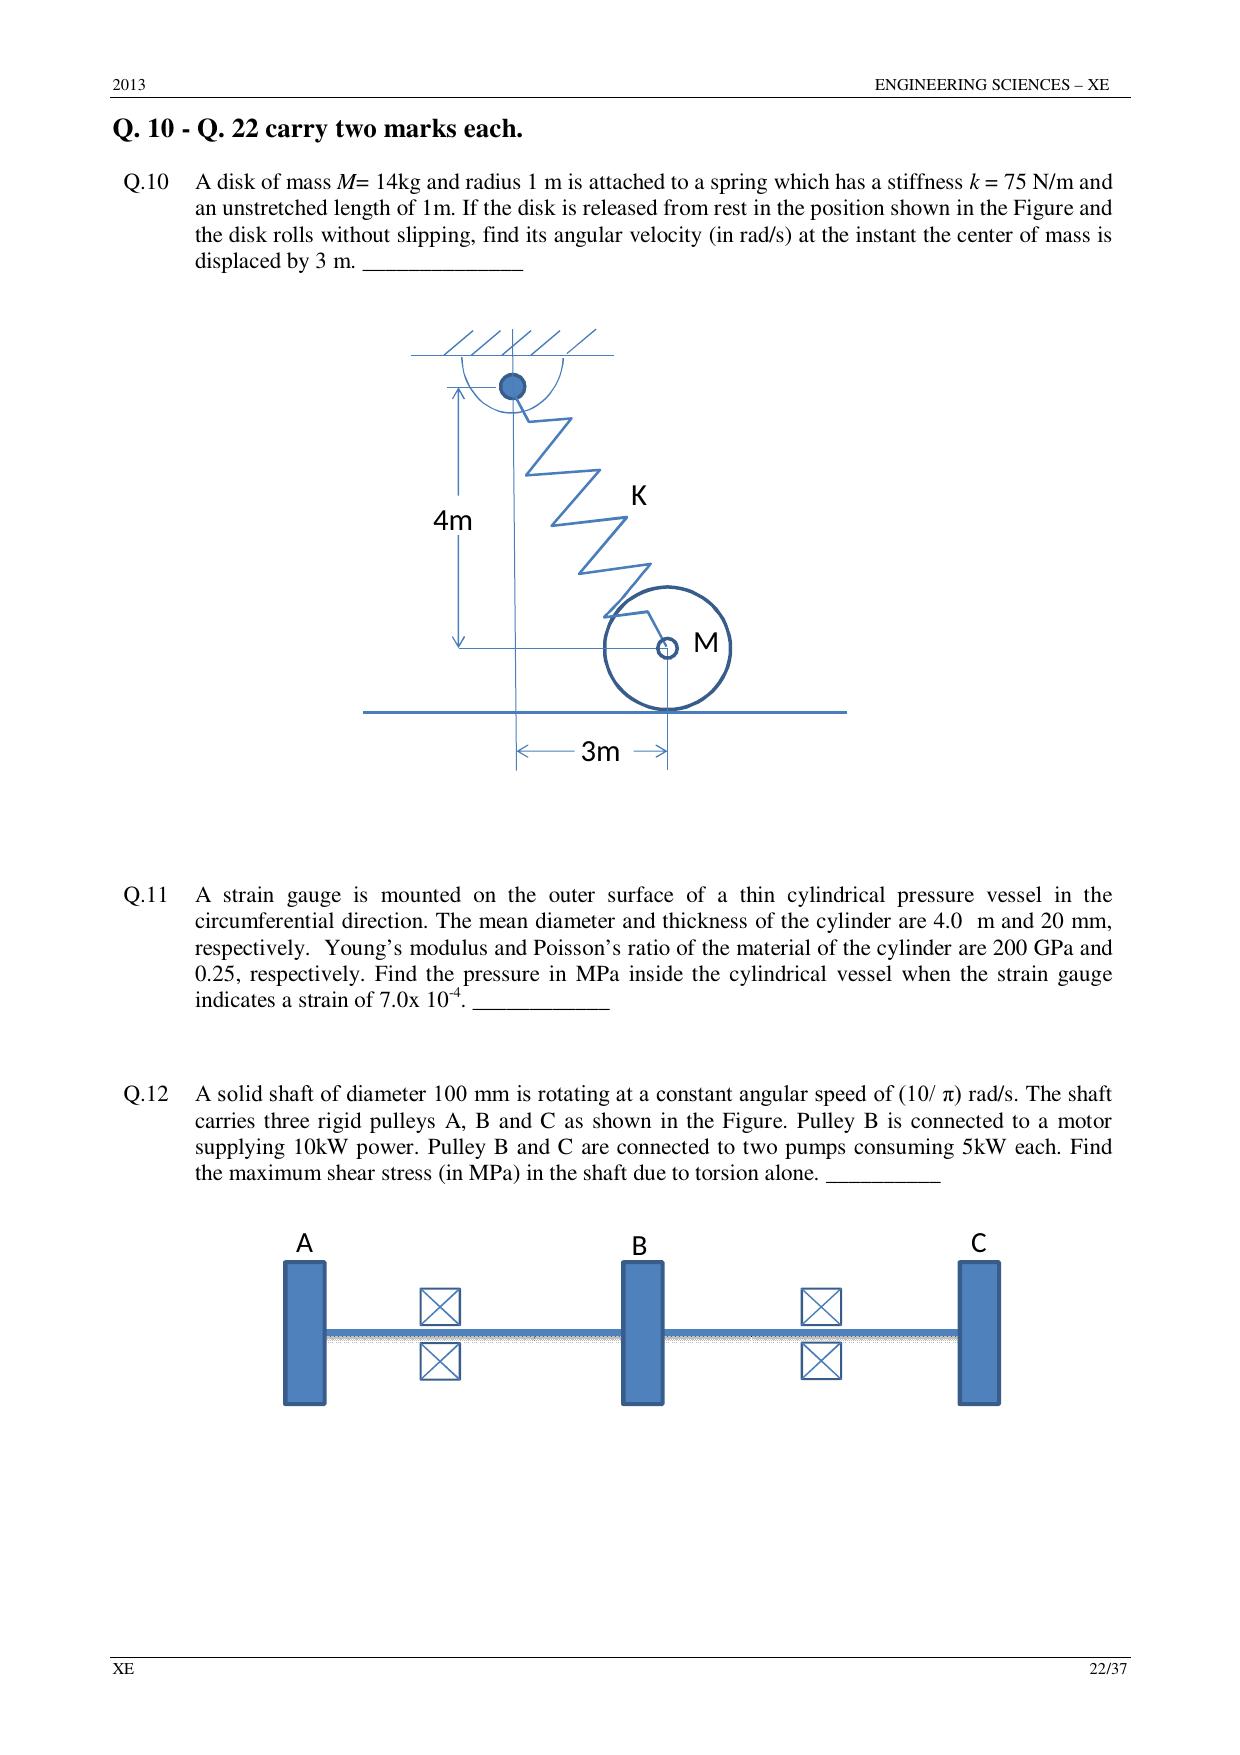 GATE 2013 Engineering Sciences (XE) Question Paper with Answer Key - Page 22